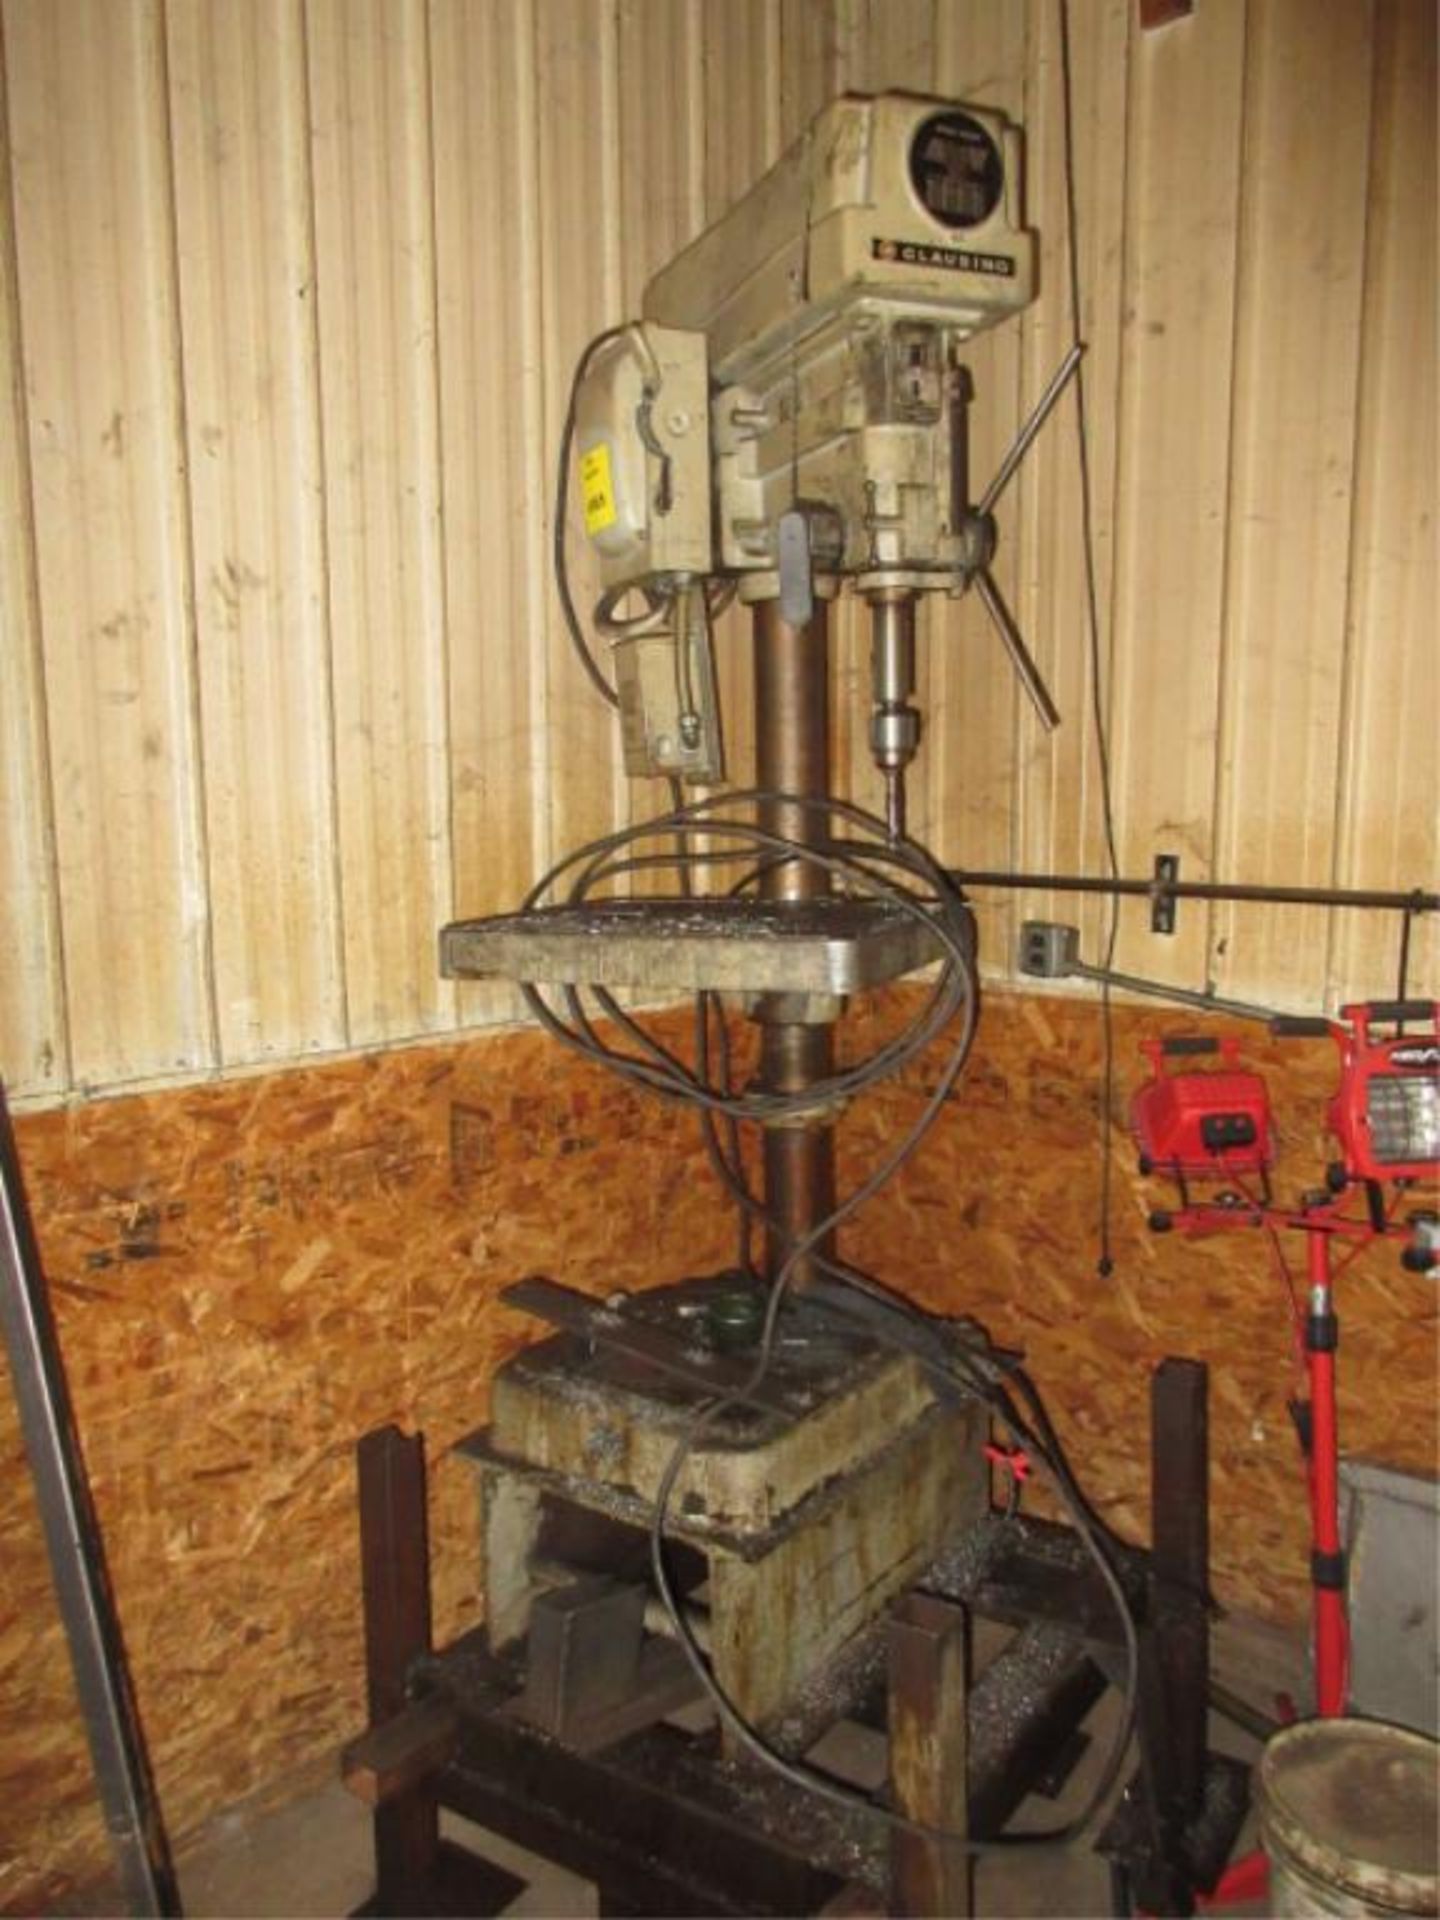 Clausing Drill Press. Clausing 2223 20" Variable Speed Drill Press, 1 hp, spindle speeds 150-2000